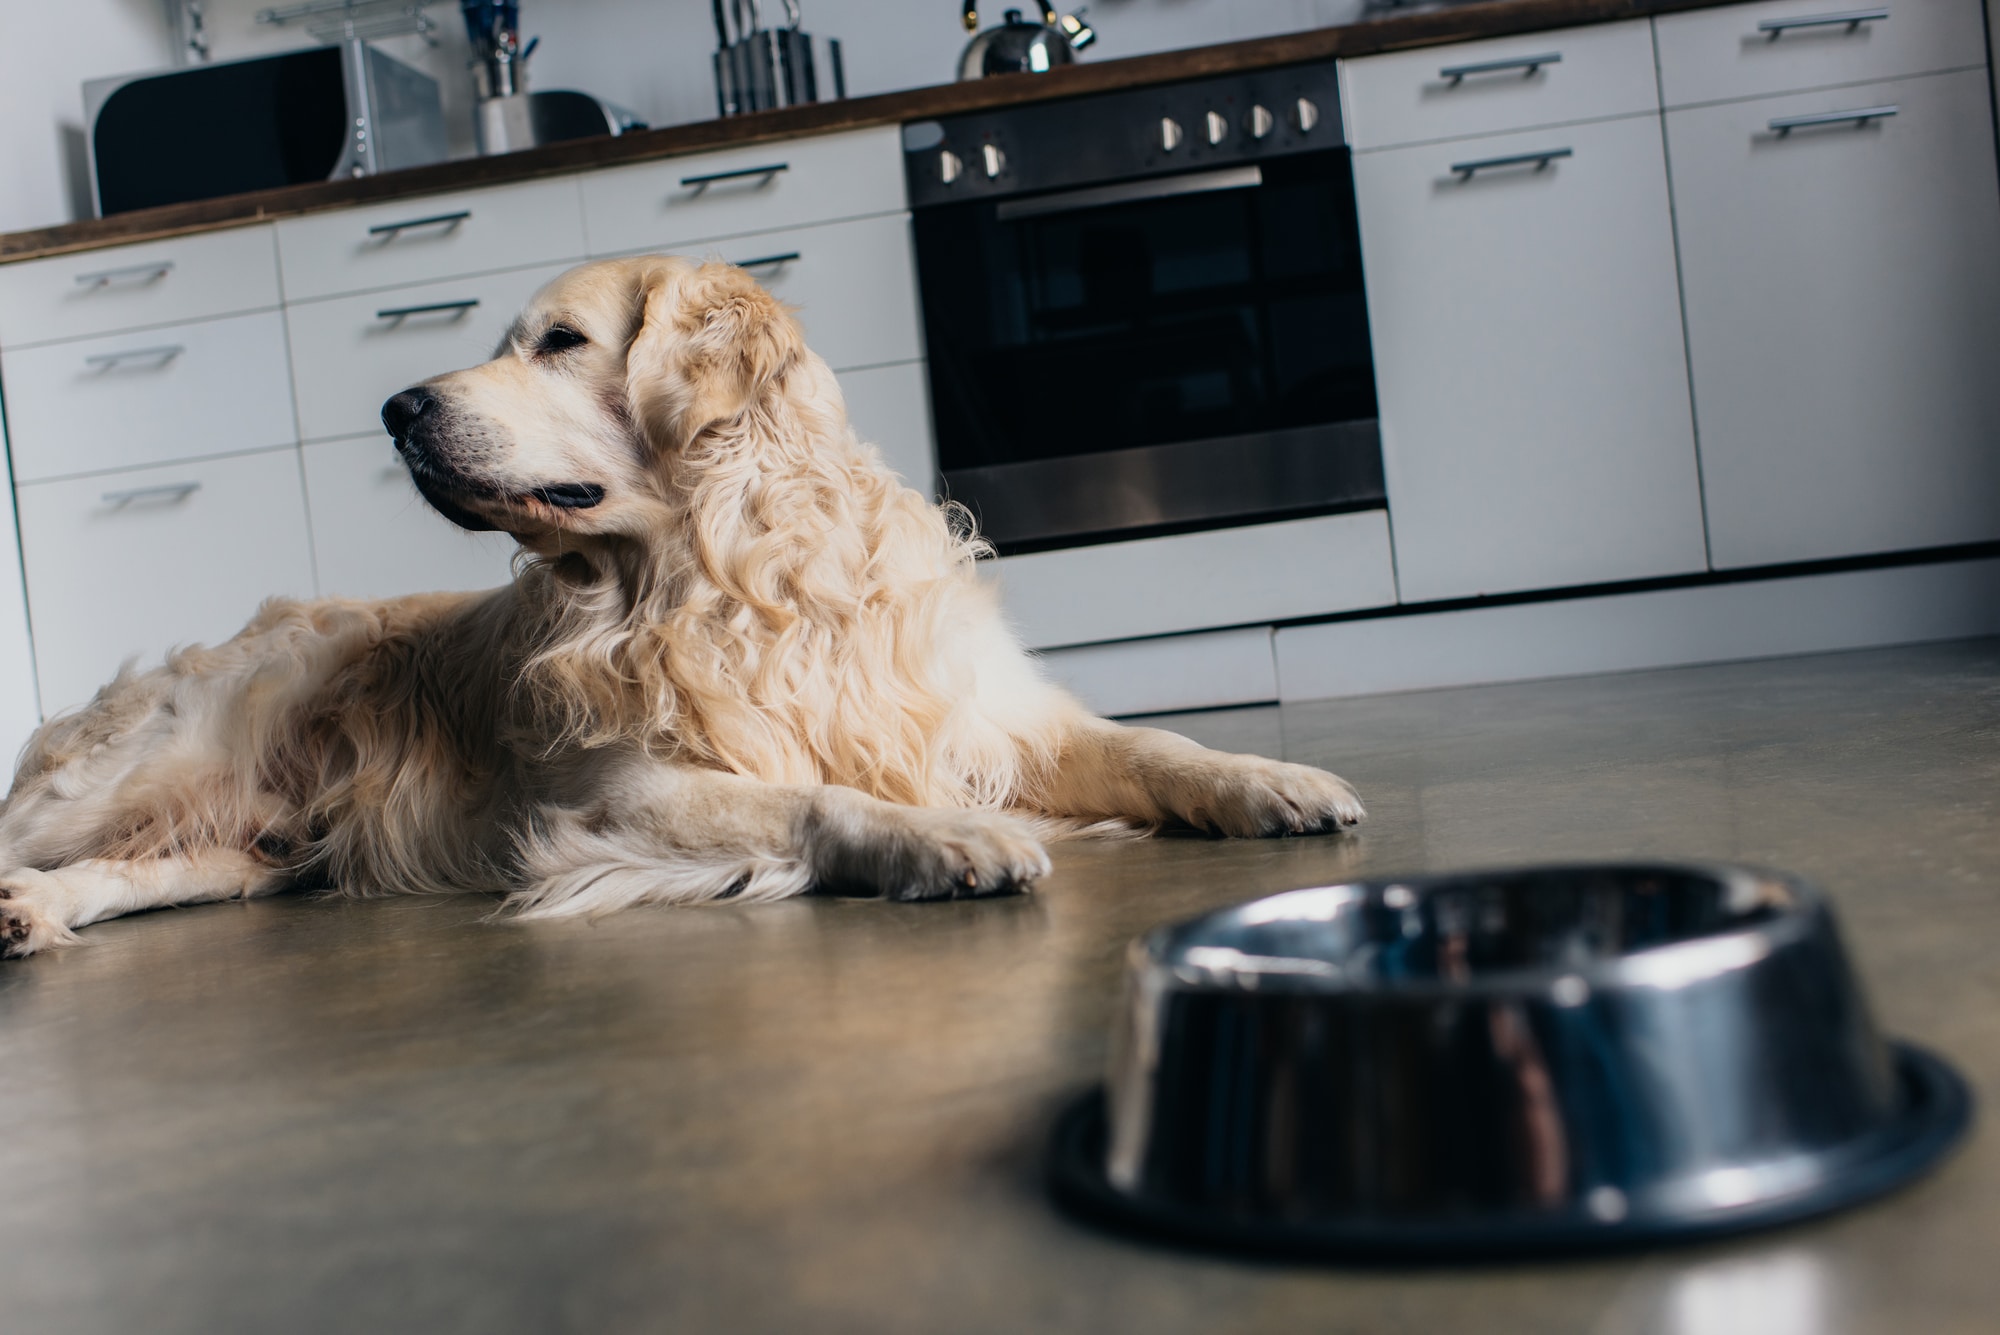 Golden retriever laying on kitchen floor with dog bowl in front of him waiting to be fed